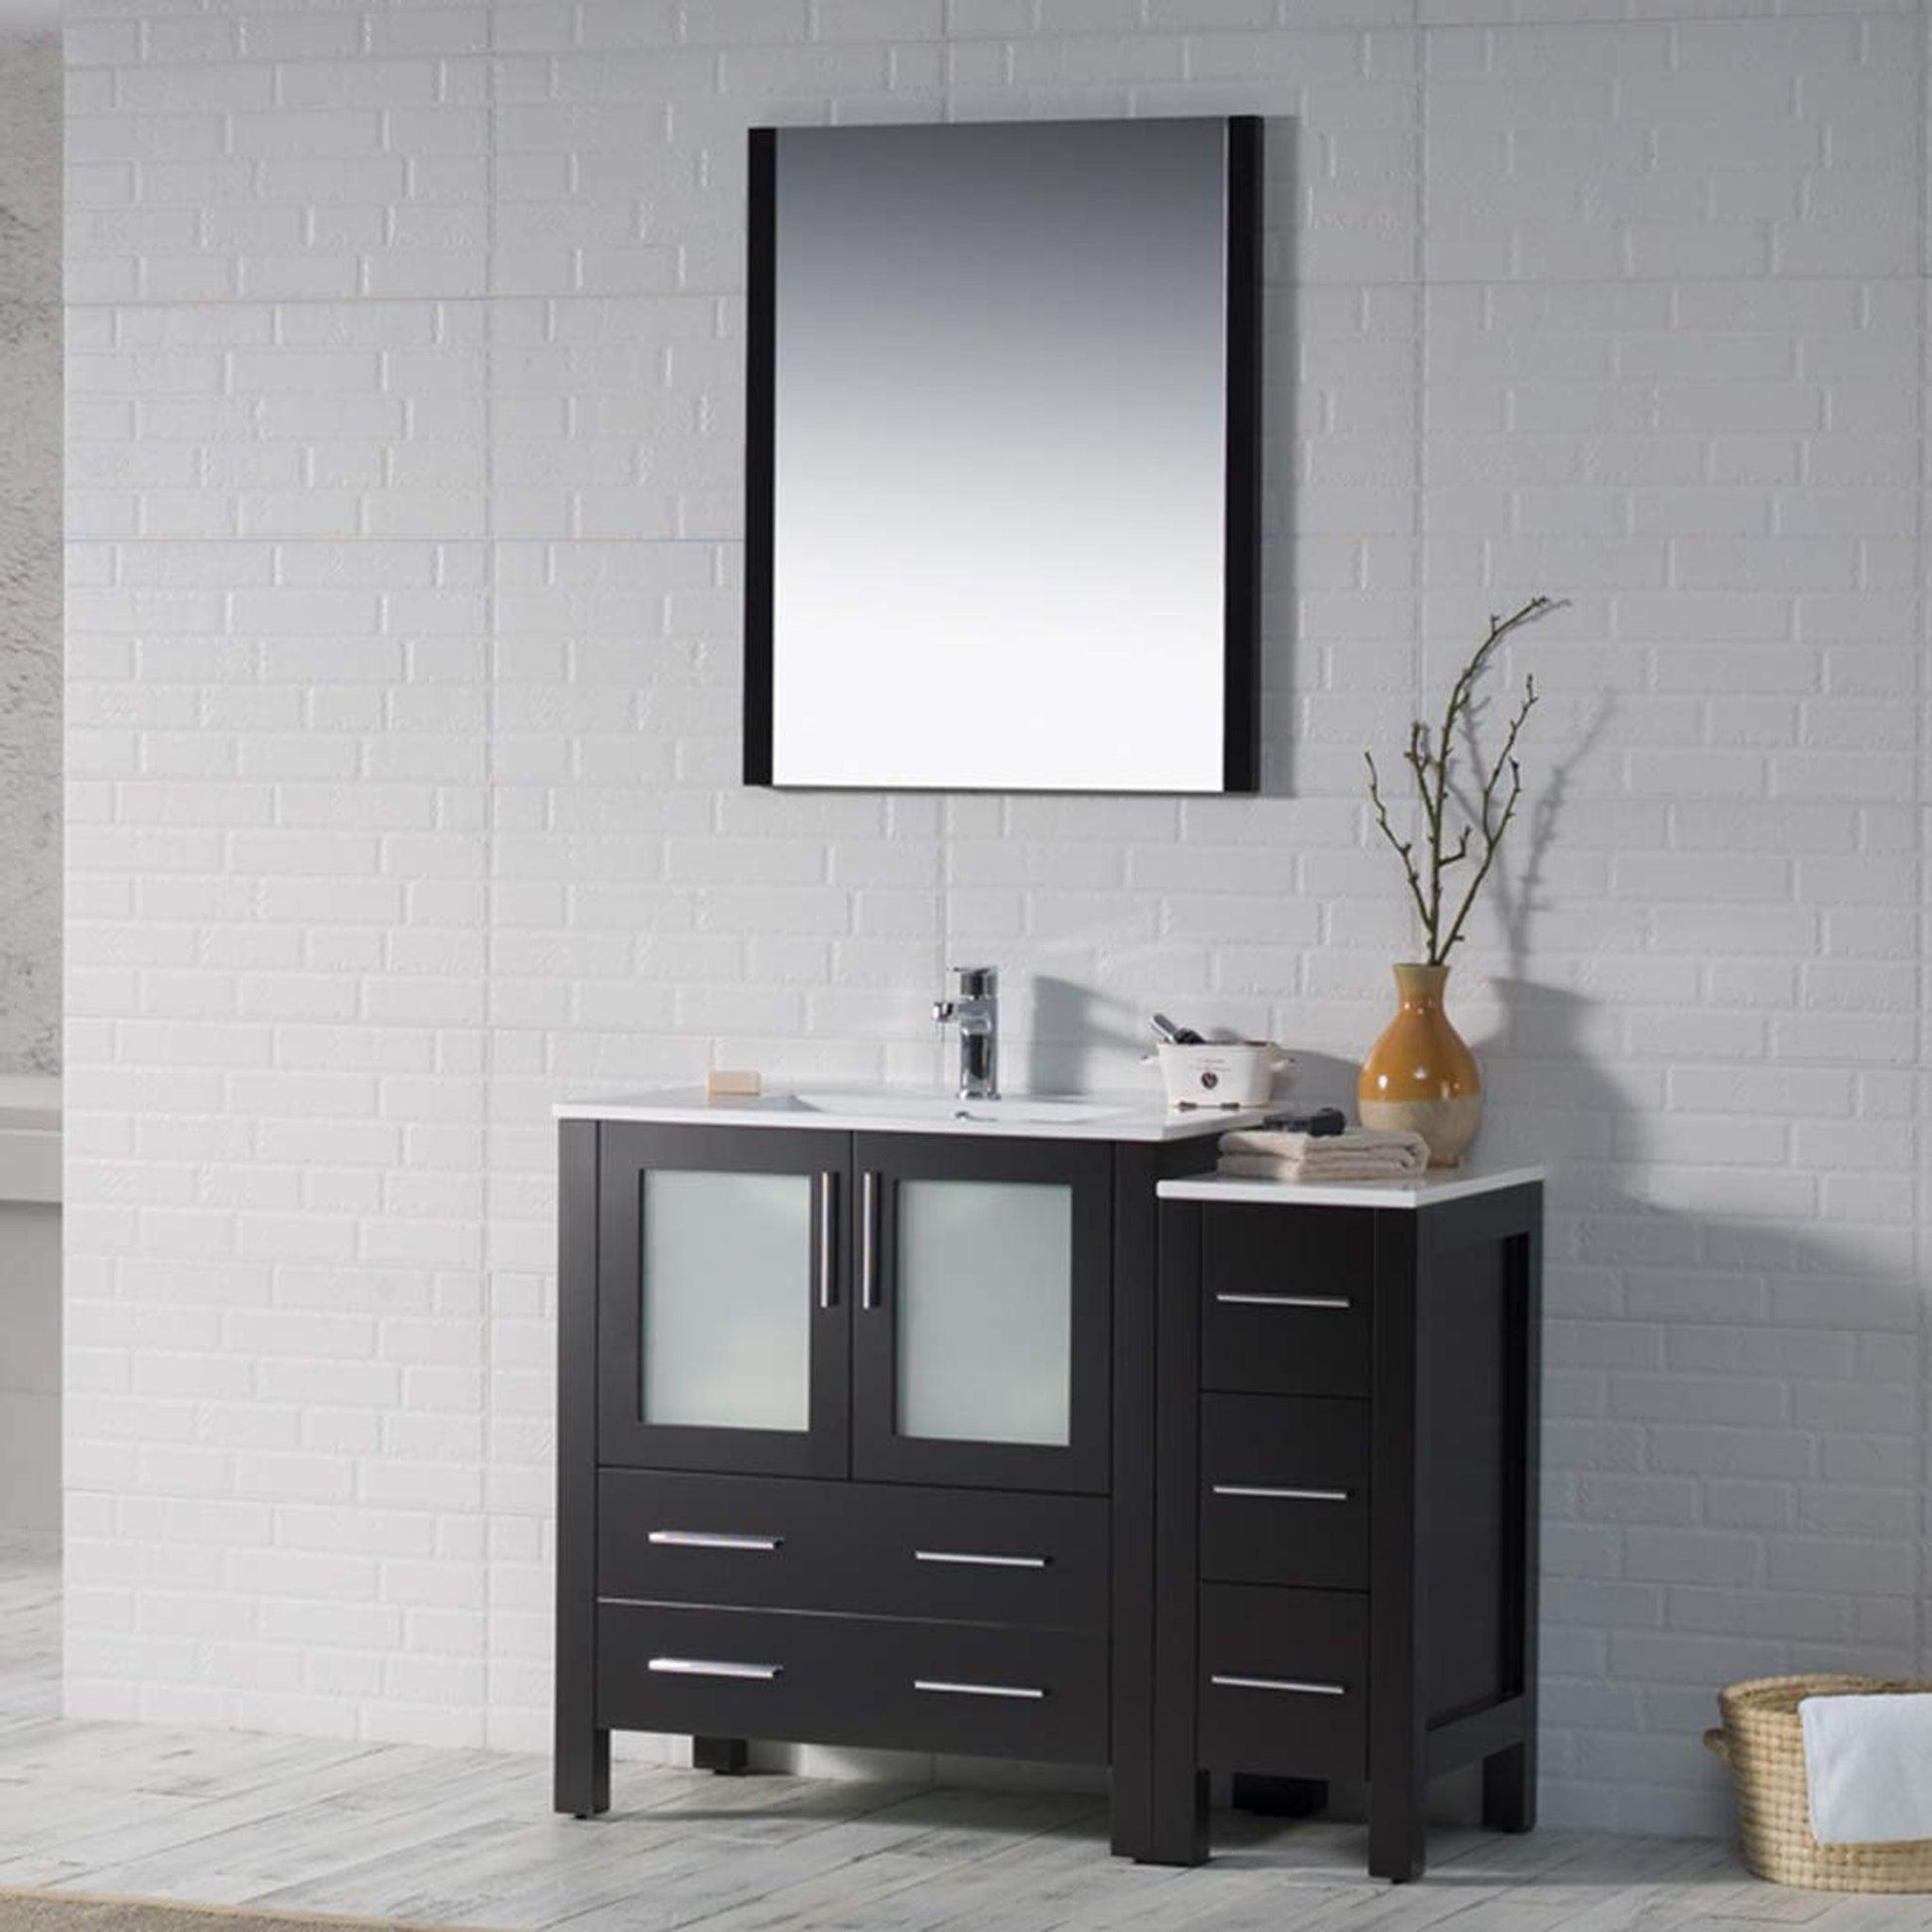 Blossom Sydney 42" Espresso Freestanding Vanity Set With Integrated Single Sink Ceramic Top and Side Cabinet